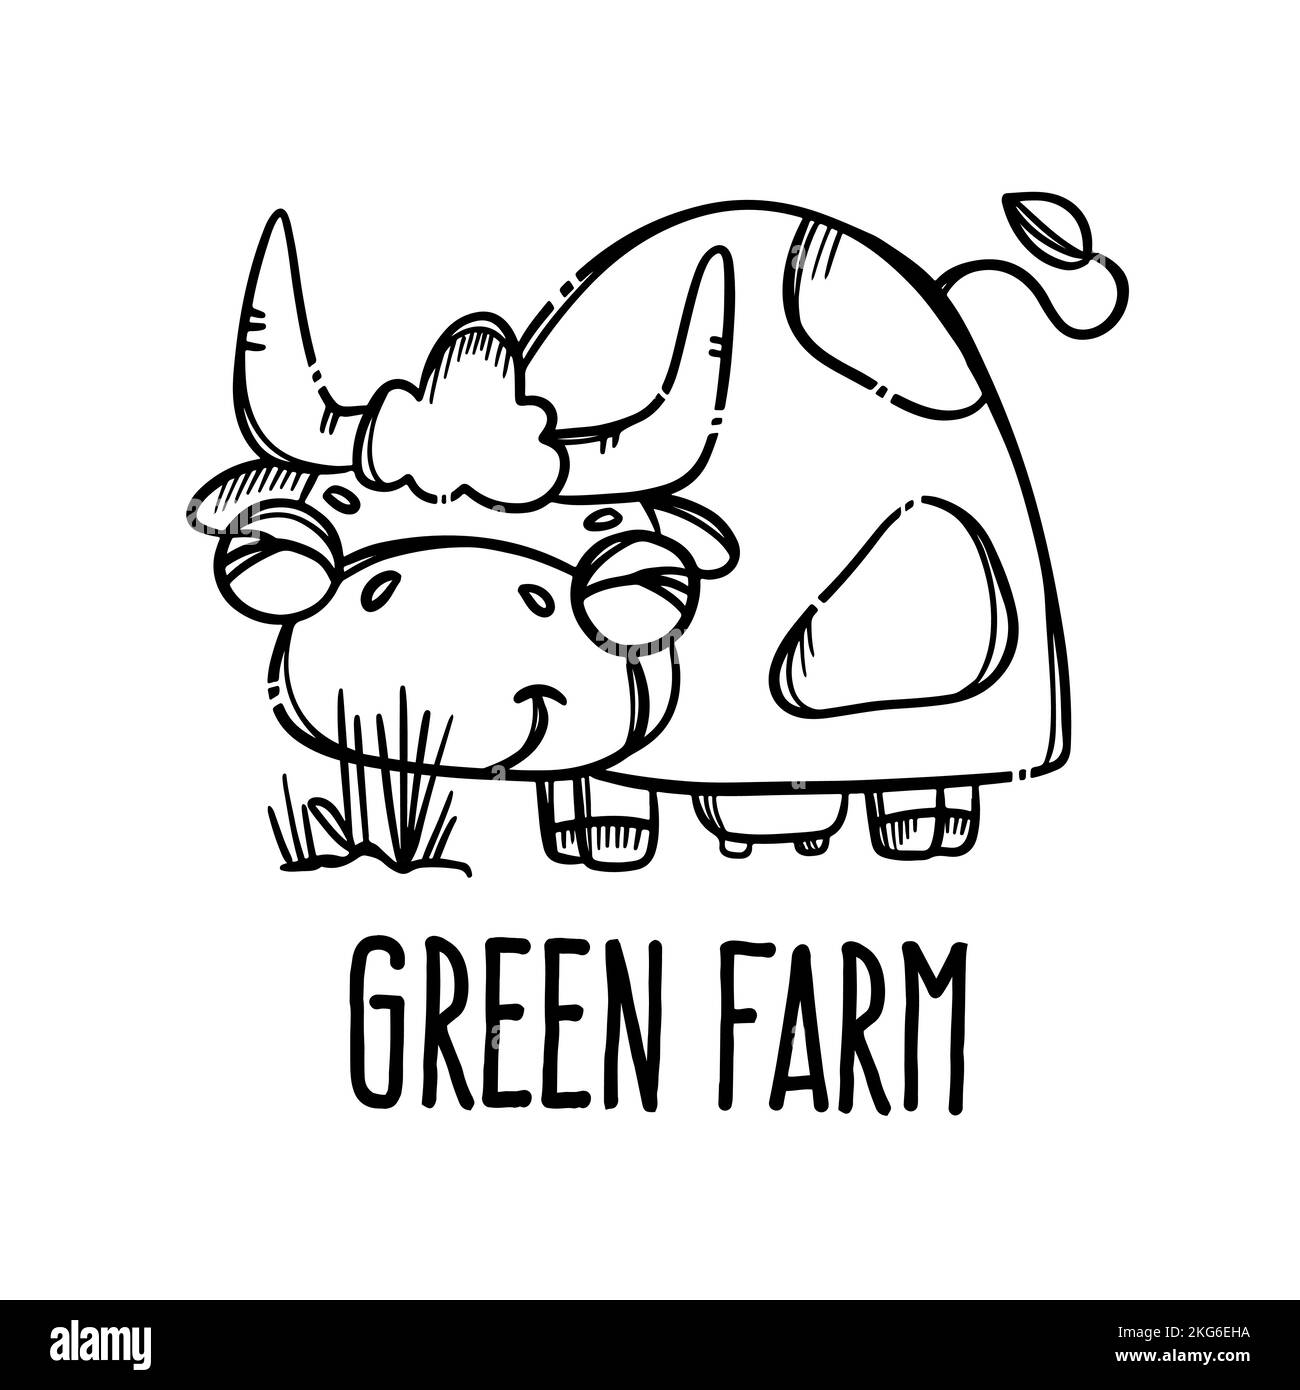 COW EATS GRASS MONOCHROME Cute Smile Animal Hand-Drawn In Sketch Style In Cartoon Farm Poster With Handwriting Text Clip Art Vector Illustration Set F Stock Vector